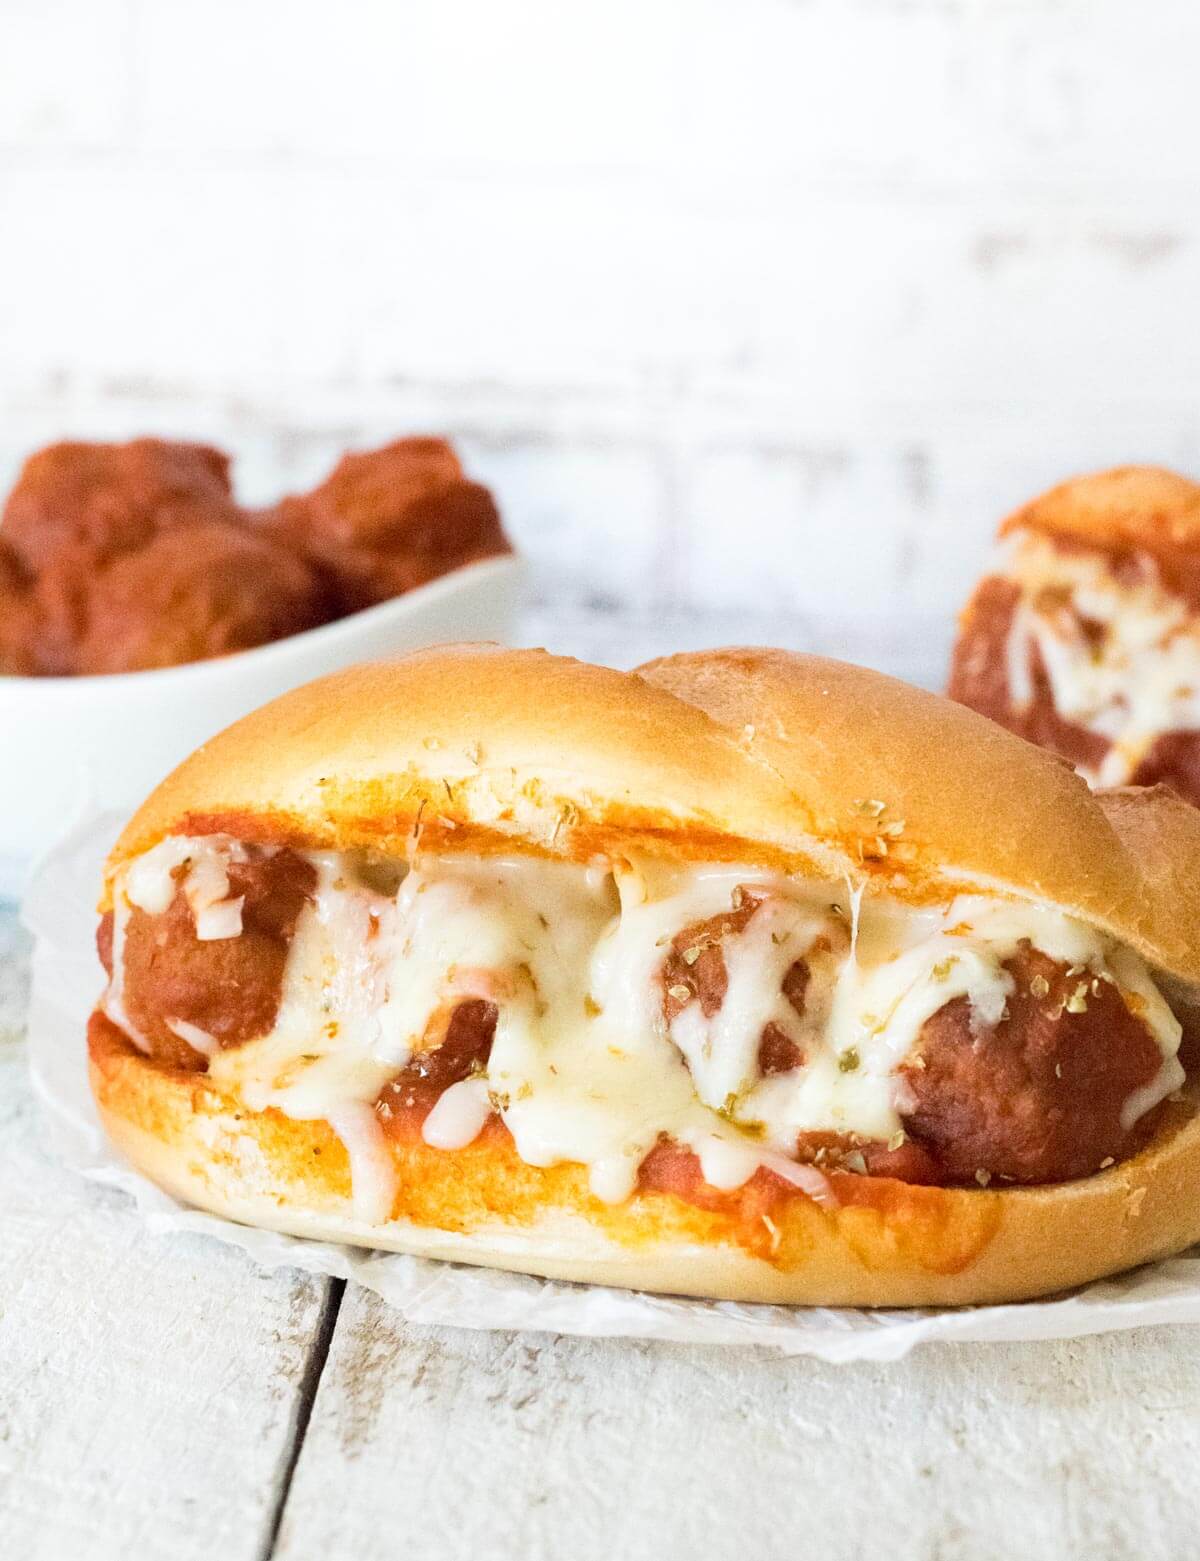 Baked meatball sub shown close up.